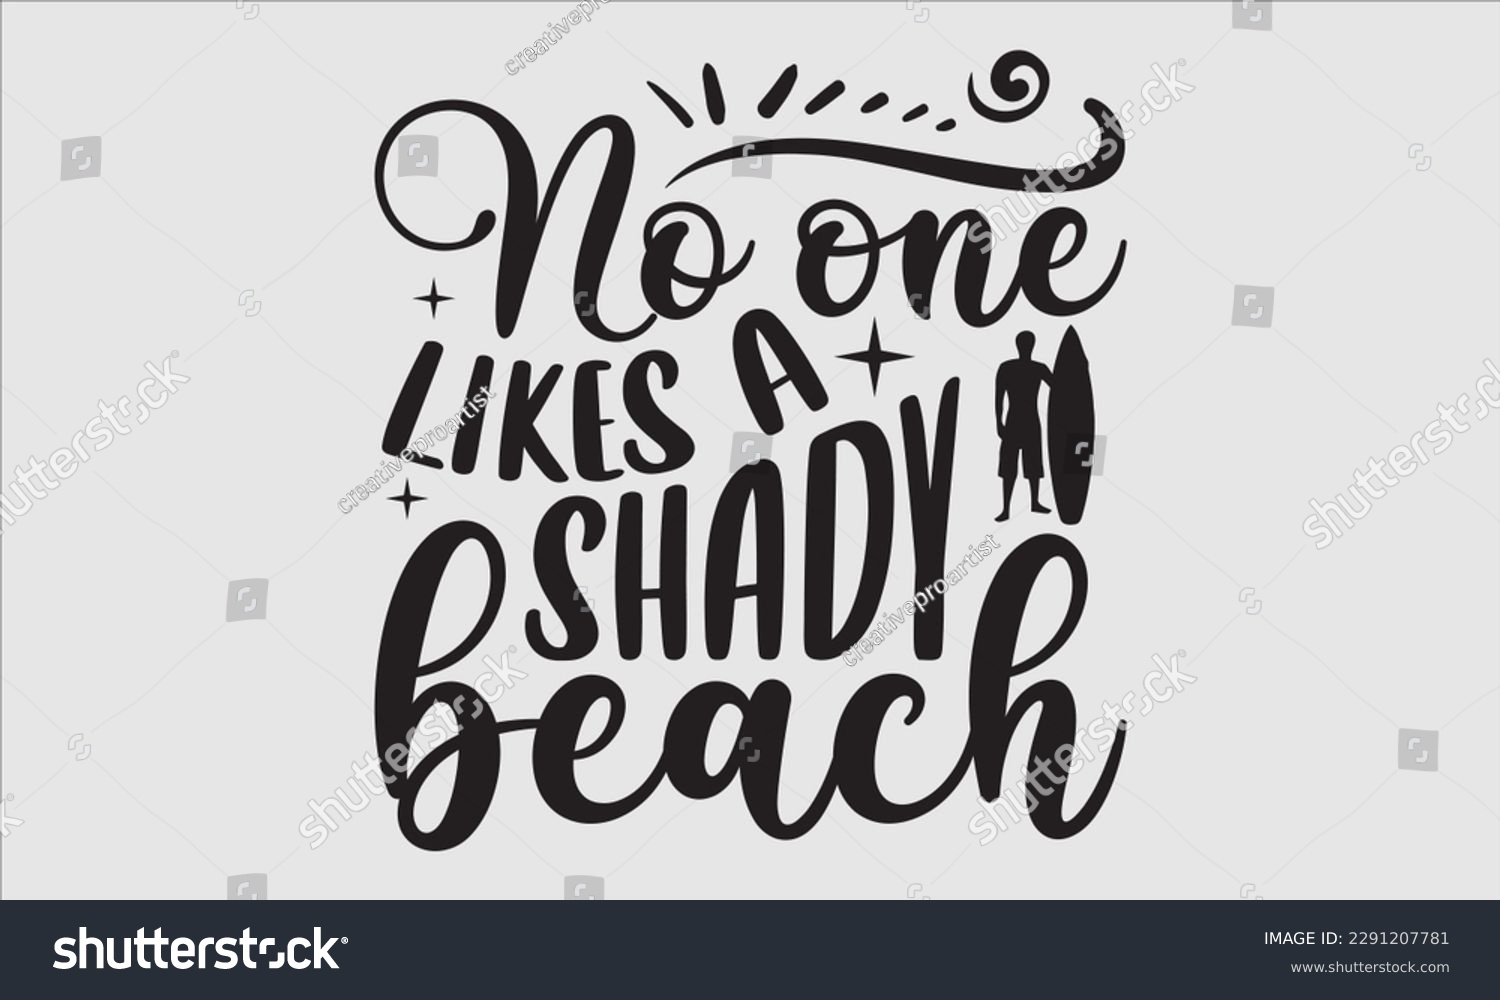 SVG of No one likes a shady beach- Summer T shirt Design, Handmade calligraphy vector illustration, Svg Files for Cricut, greeting card template with typography text, EPS 10 svg